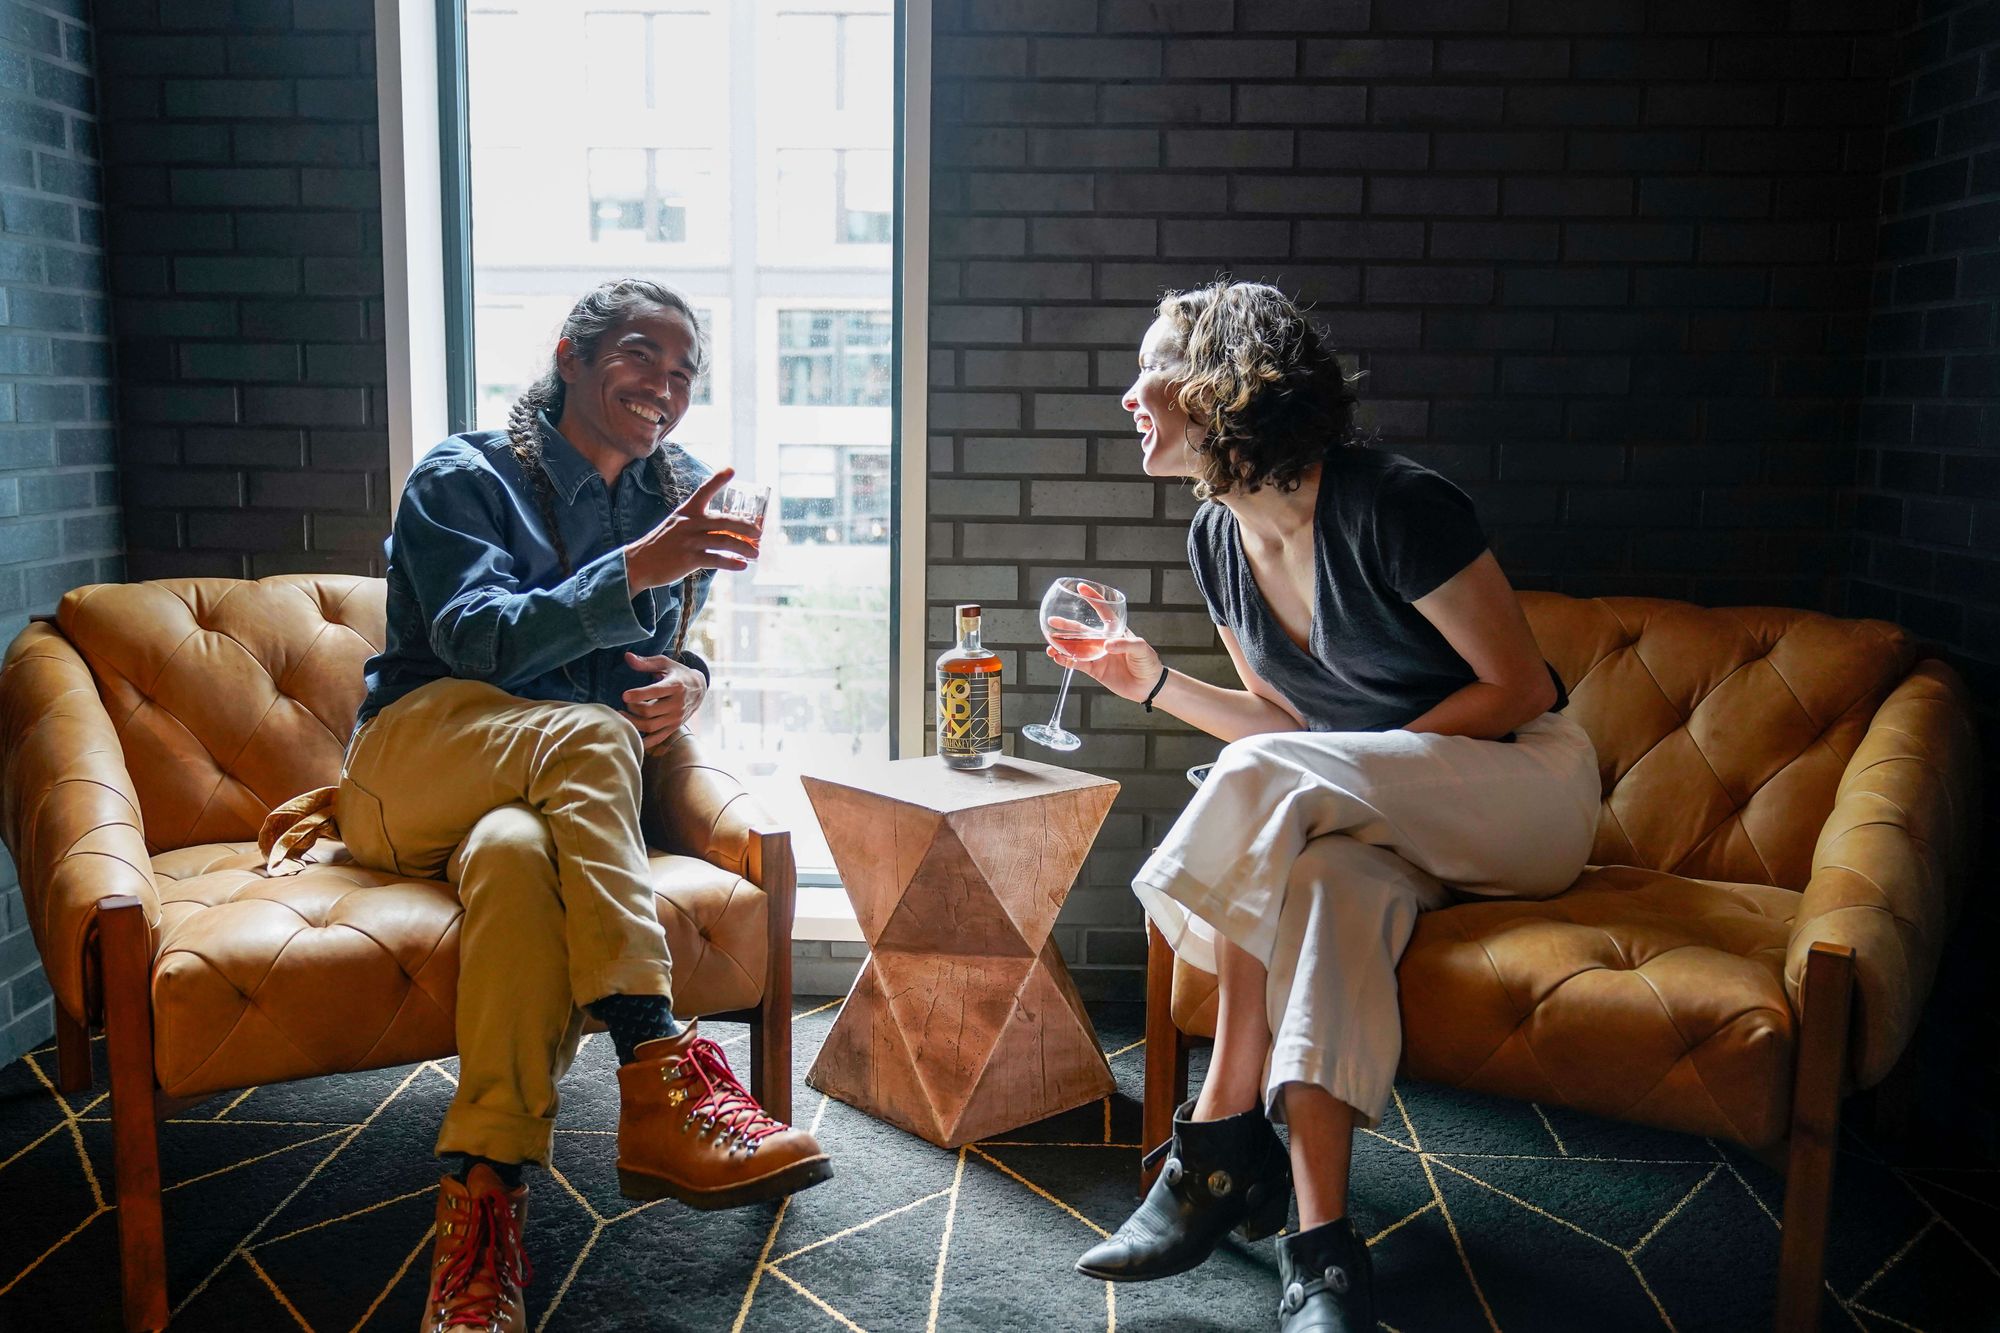 how a birthday sparked an idea for a zero-alcohol brand - photo of a man and woman enjoying a non-alcoholic whiskey drink 